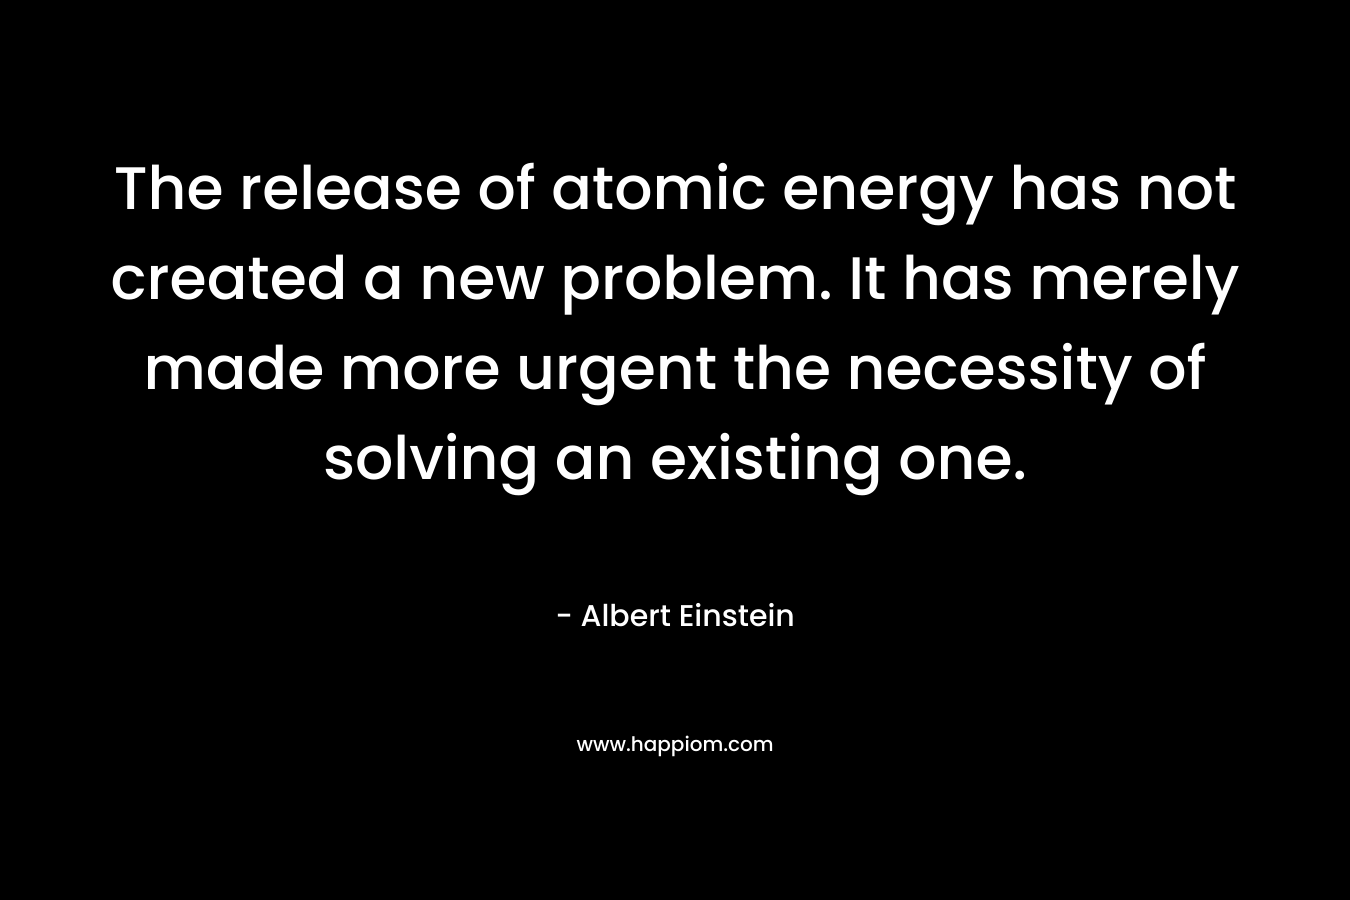 The release of atomic energy has not created a new problem. It has merely made more urgent the necessity of solving an existing one. – Albert Einstein